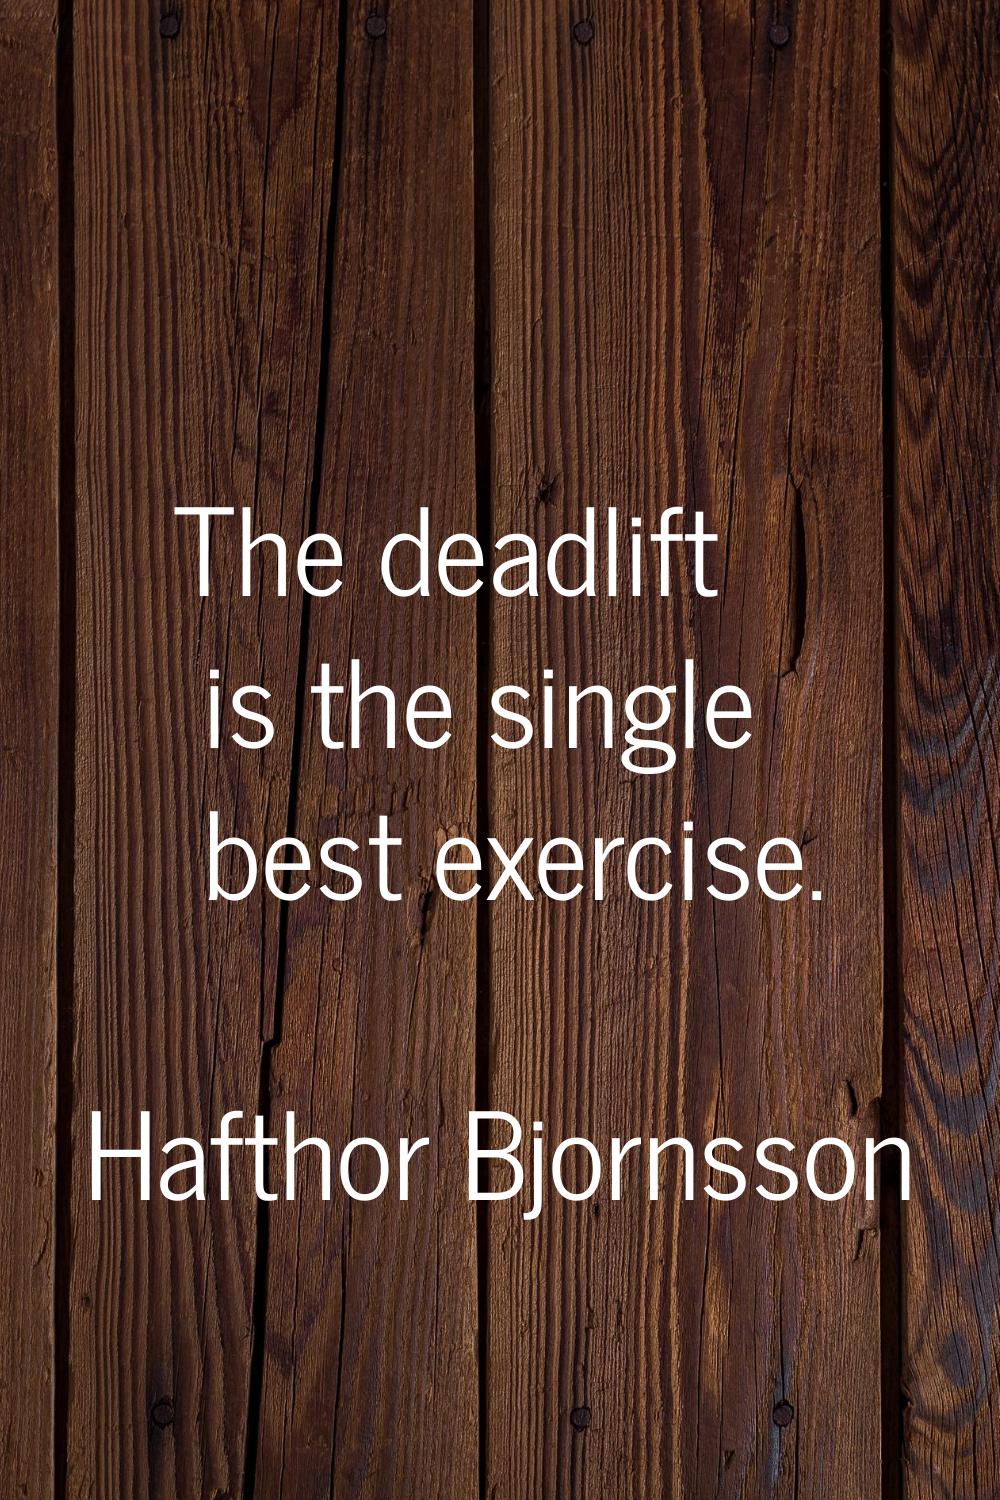 The deadlift is the single best exercise.